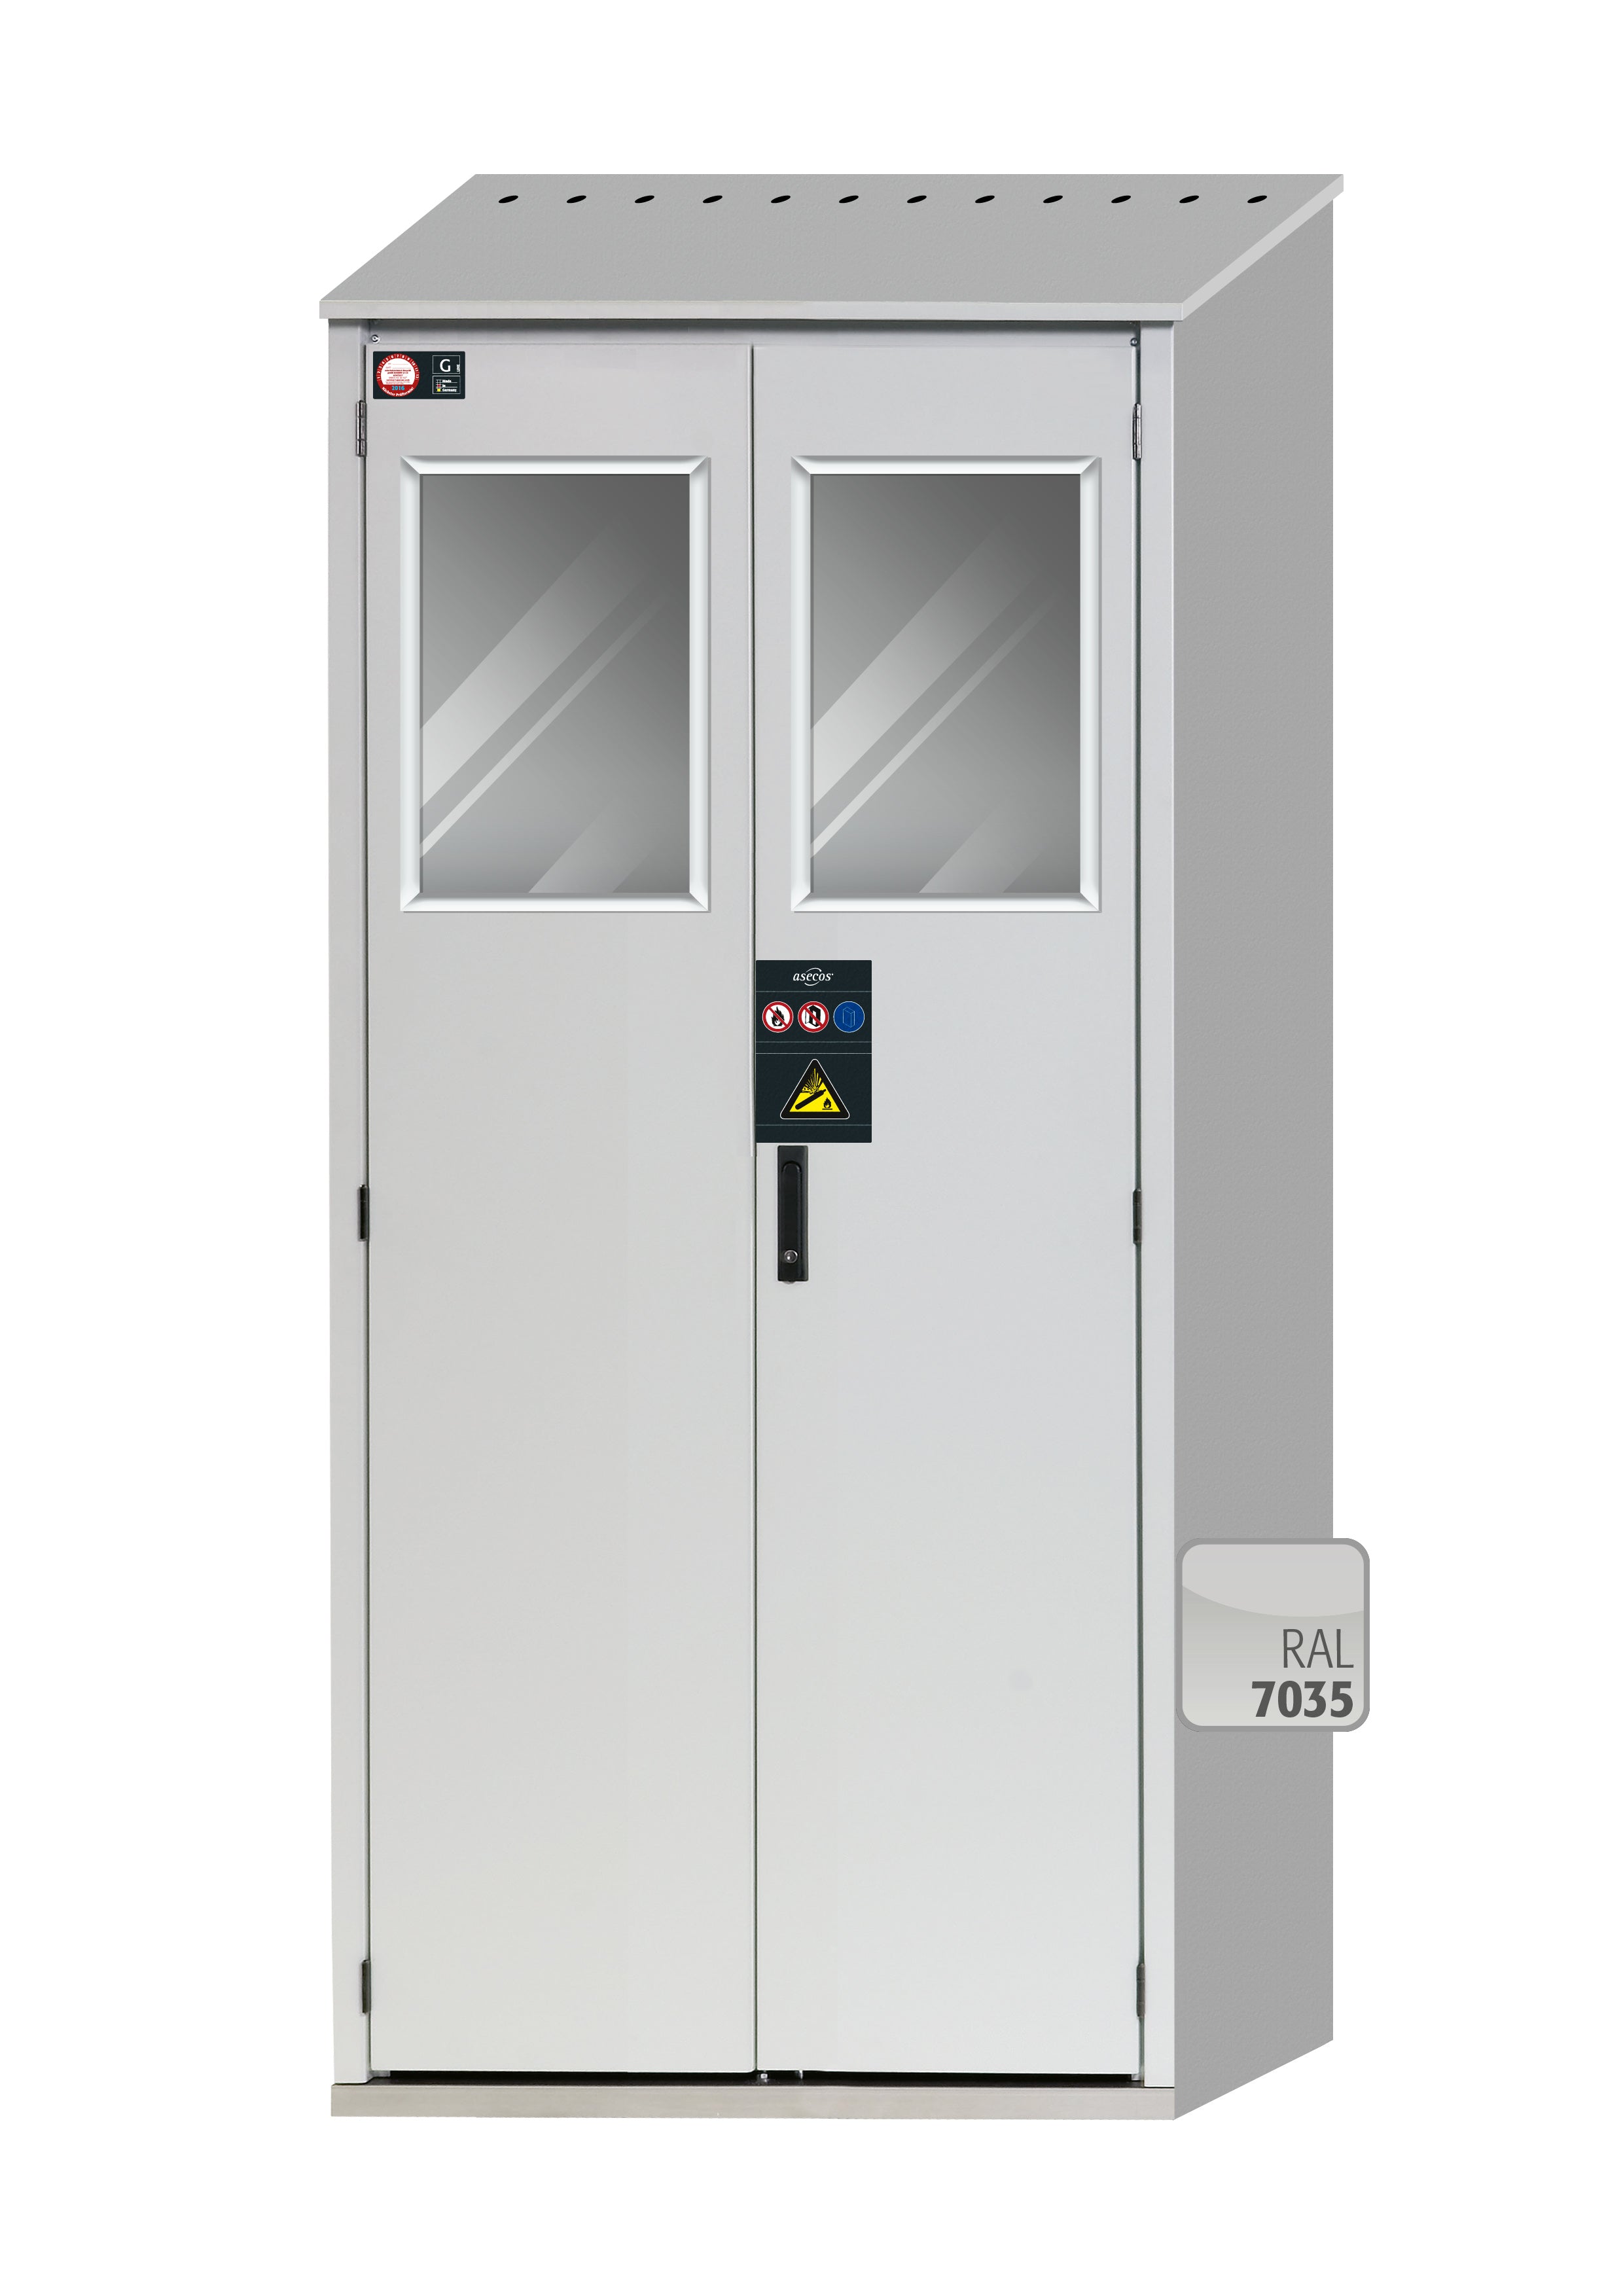 Compressed gas bottle cabinet G-OD model GOD.215.100.WDHW in light gray RAL 7035 with folding window and equipment package for 3x compressed gas bottles of 50 liters each